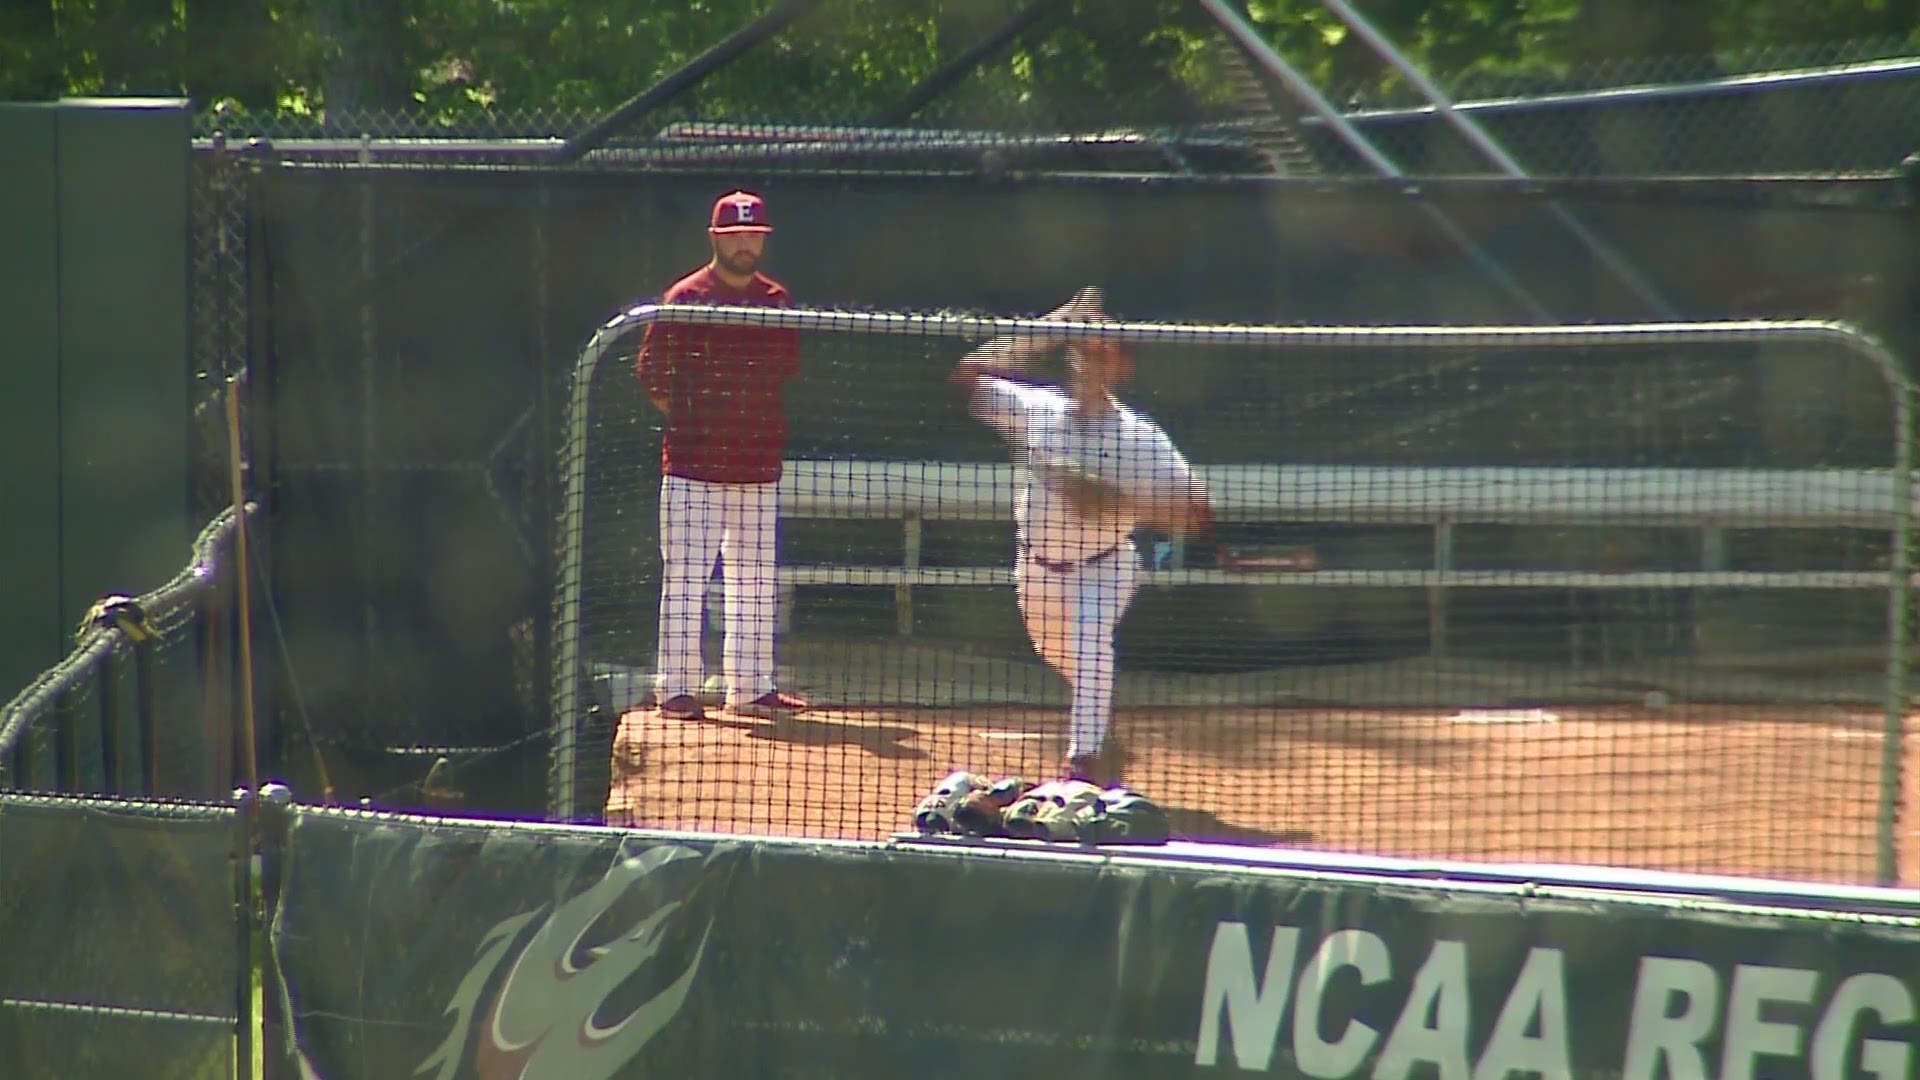 The Mariners selected Elon right-hander George Kirby, 20th overall.  Kirby struck out 107 batters over 88 and a third innings with only 6 walks.  Draft experts believe he has the best command in this year's MLB Draft.